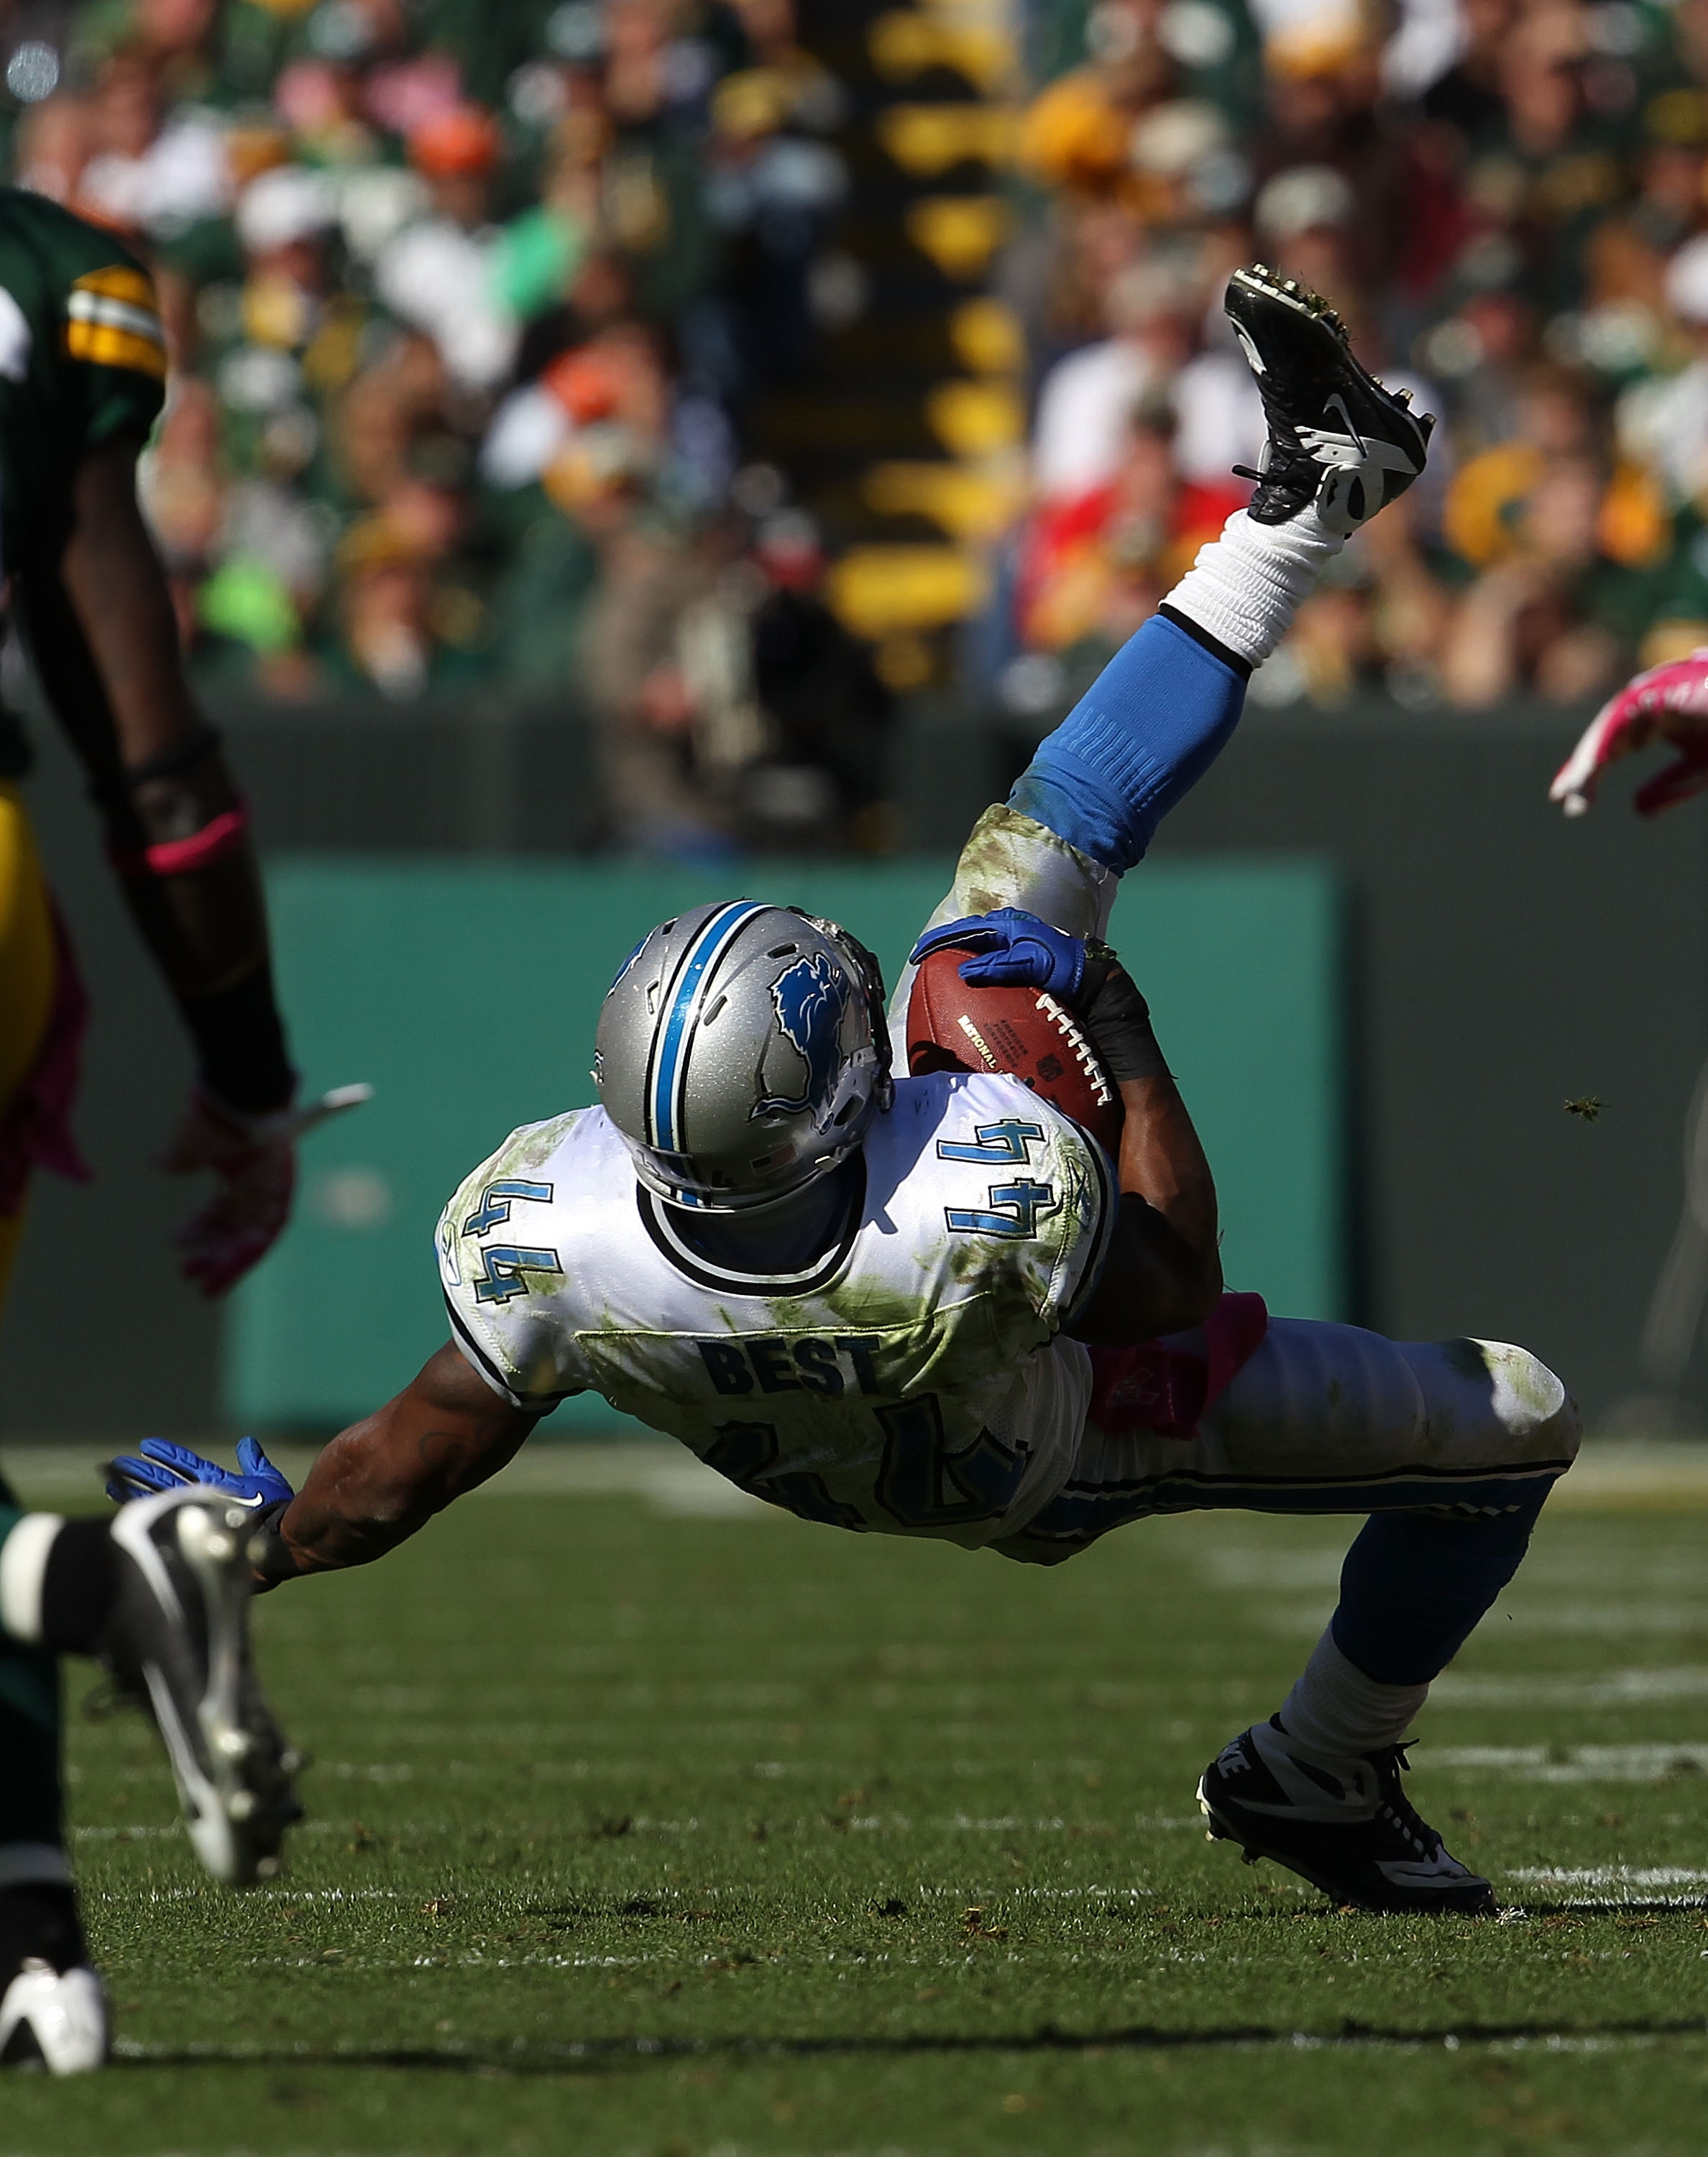 GREEN BAY, WI - OCTOBER 03: Rahvid Best #44 of the Detroit Lions flips in the air after being tackled by Charles Woodson of the Green Bay Packers at Lambeau Field on October 3, 2010 in Green Bay, Wisconsin. The Packers defeated the Lions 28-26.  (Photo by